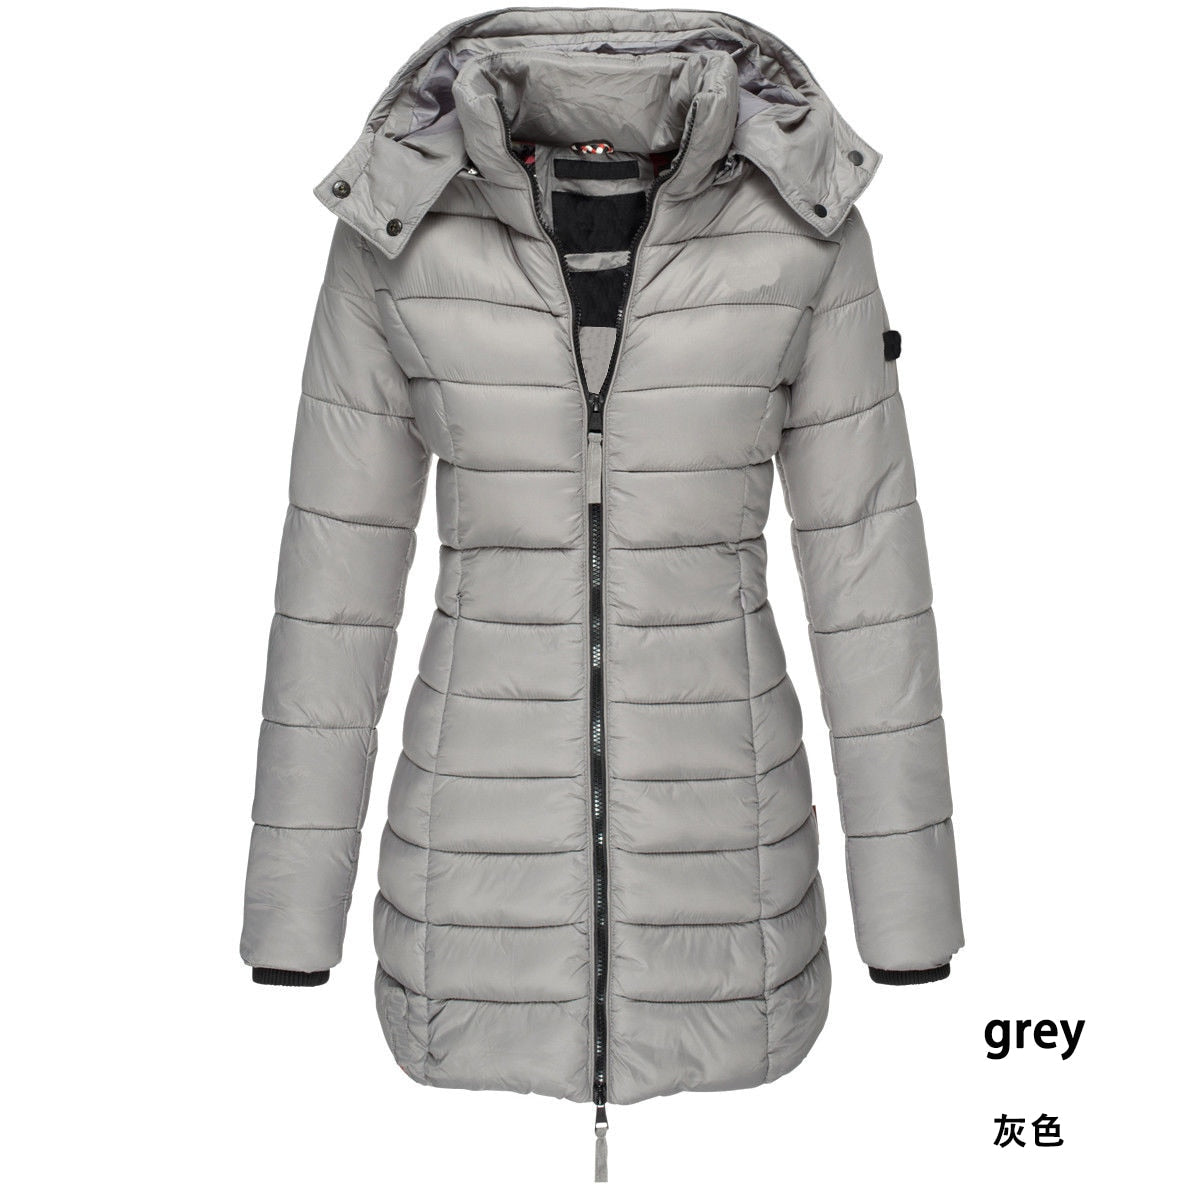 Womens Winter Long Down Coat Thicken Warm Hooded Cotton Padded Puffer Jacket Overcoat